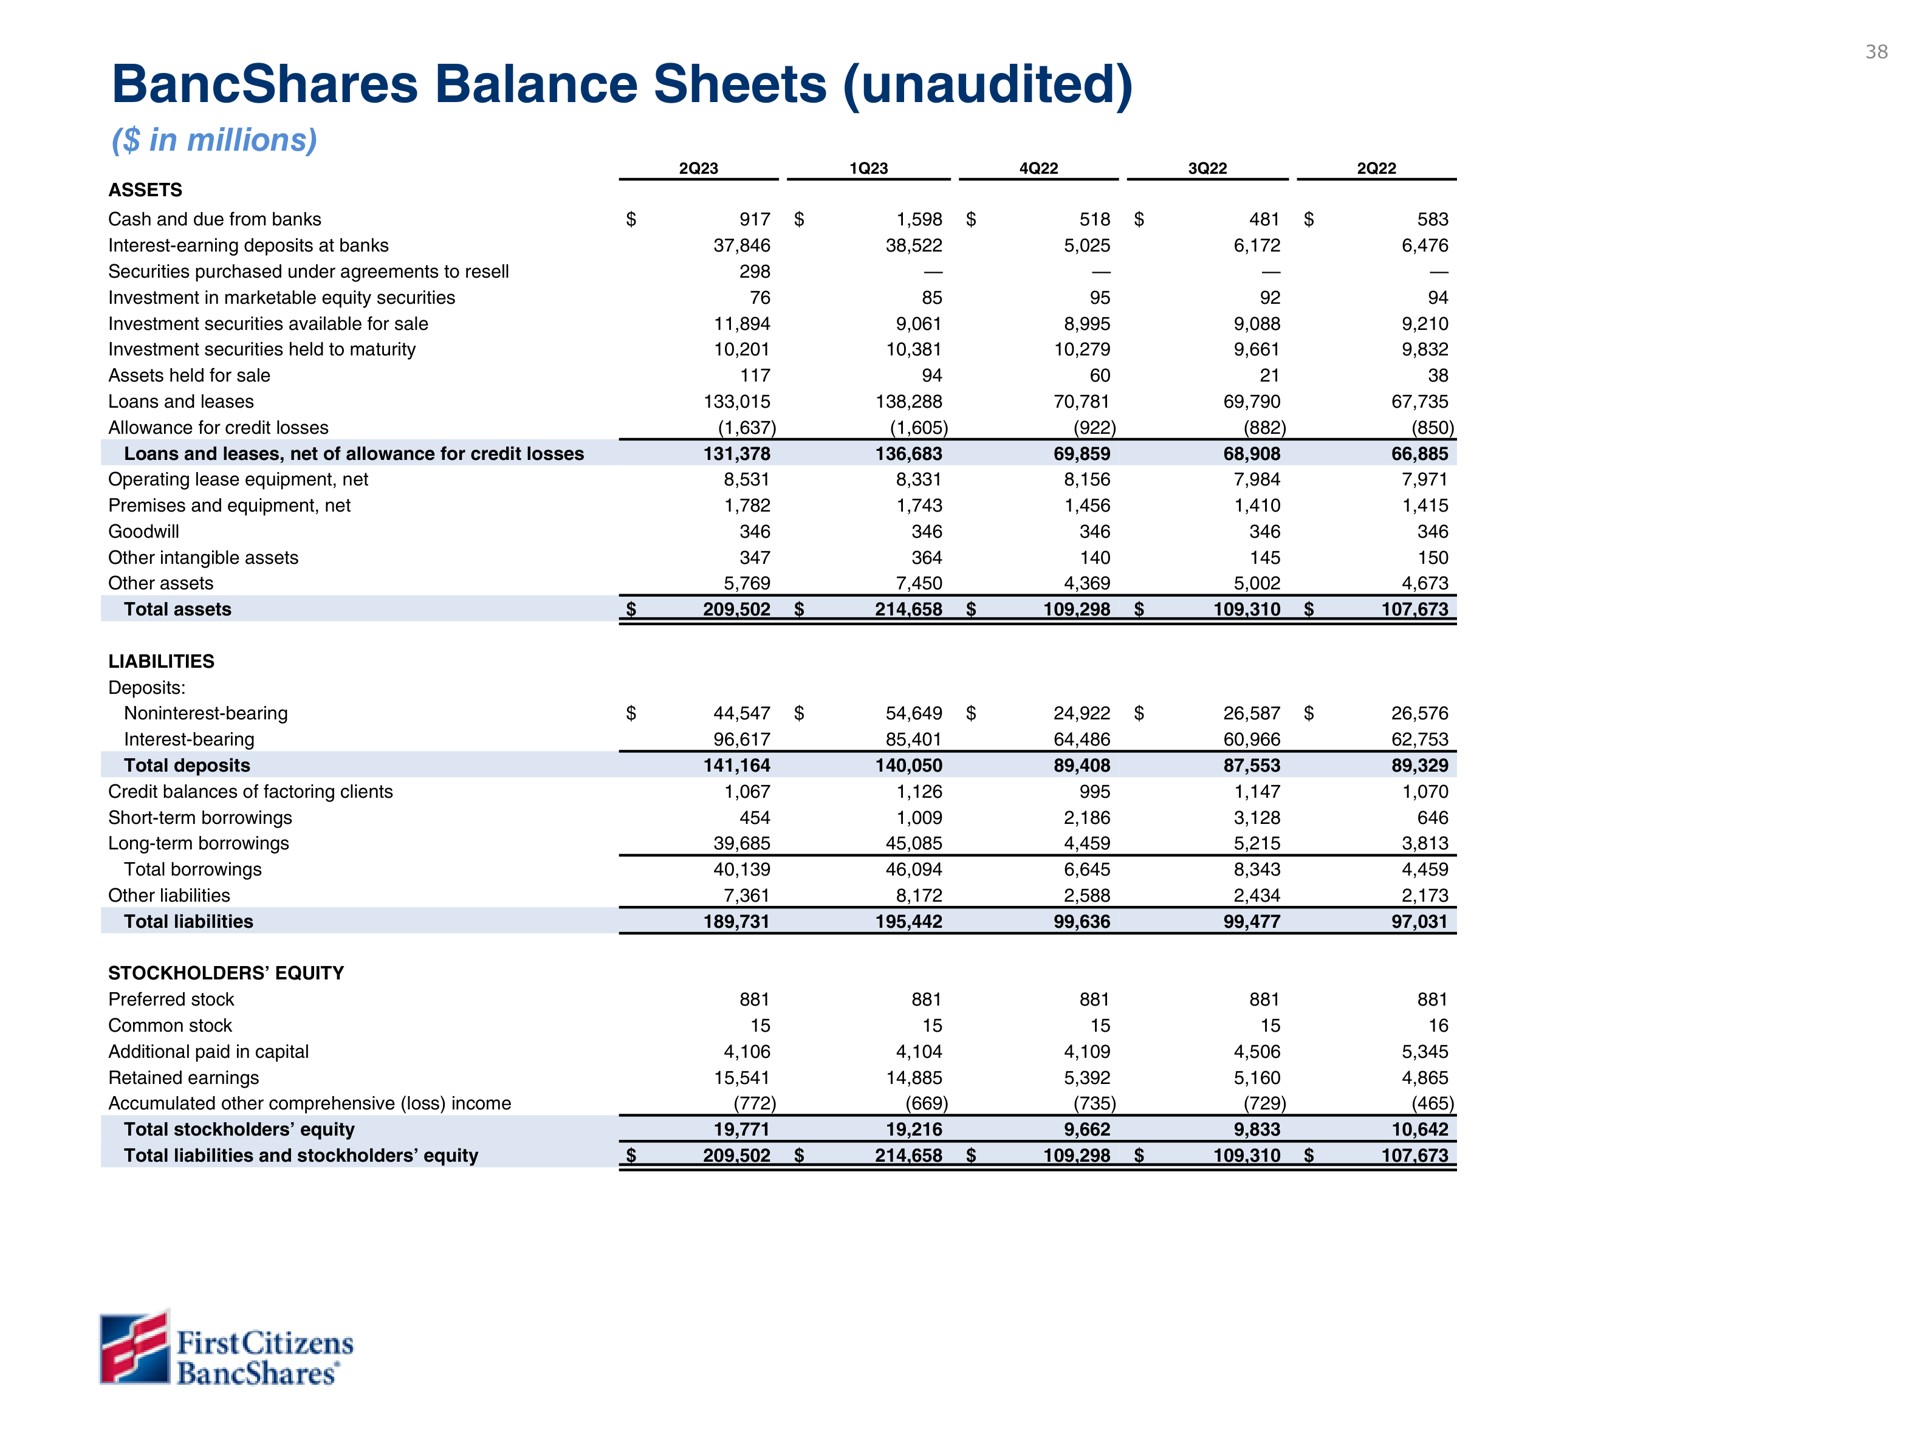 balance sheets unaudited | First Citizens BancShares